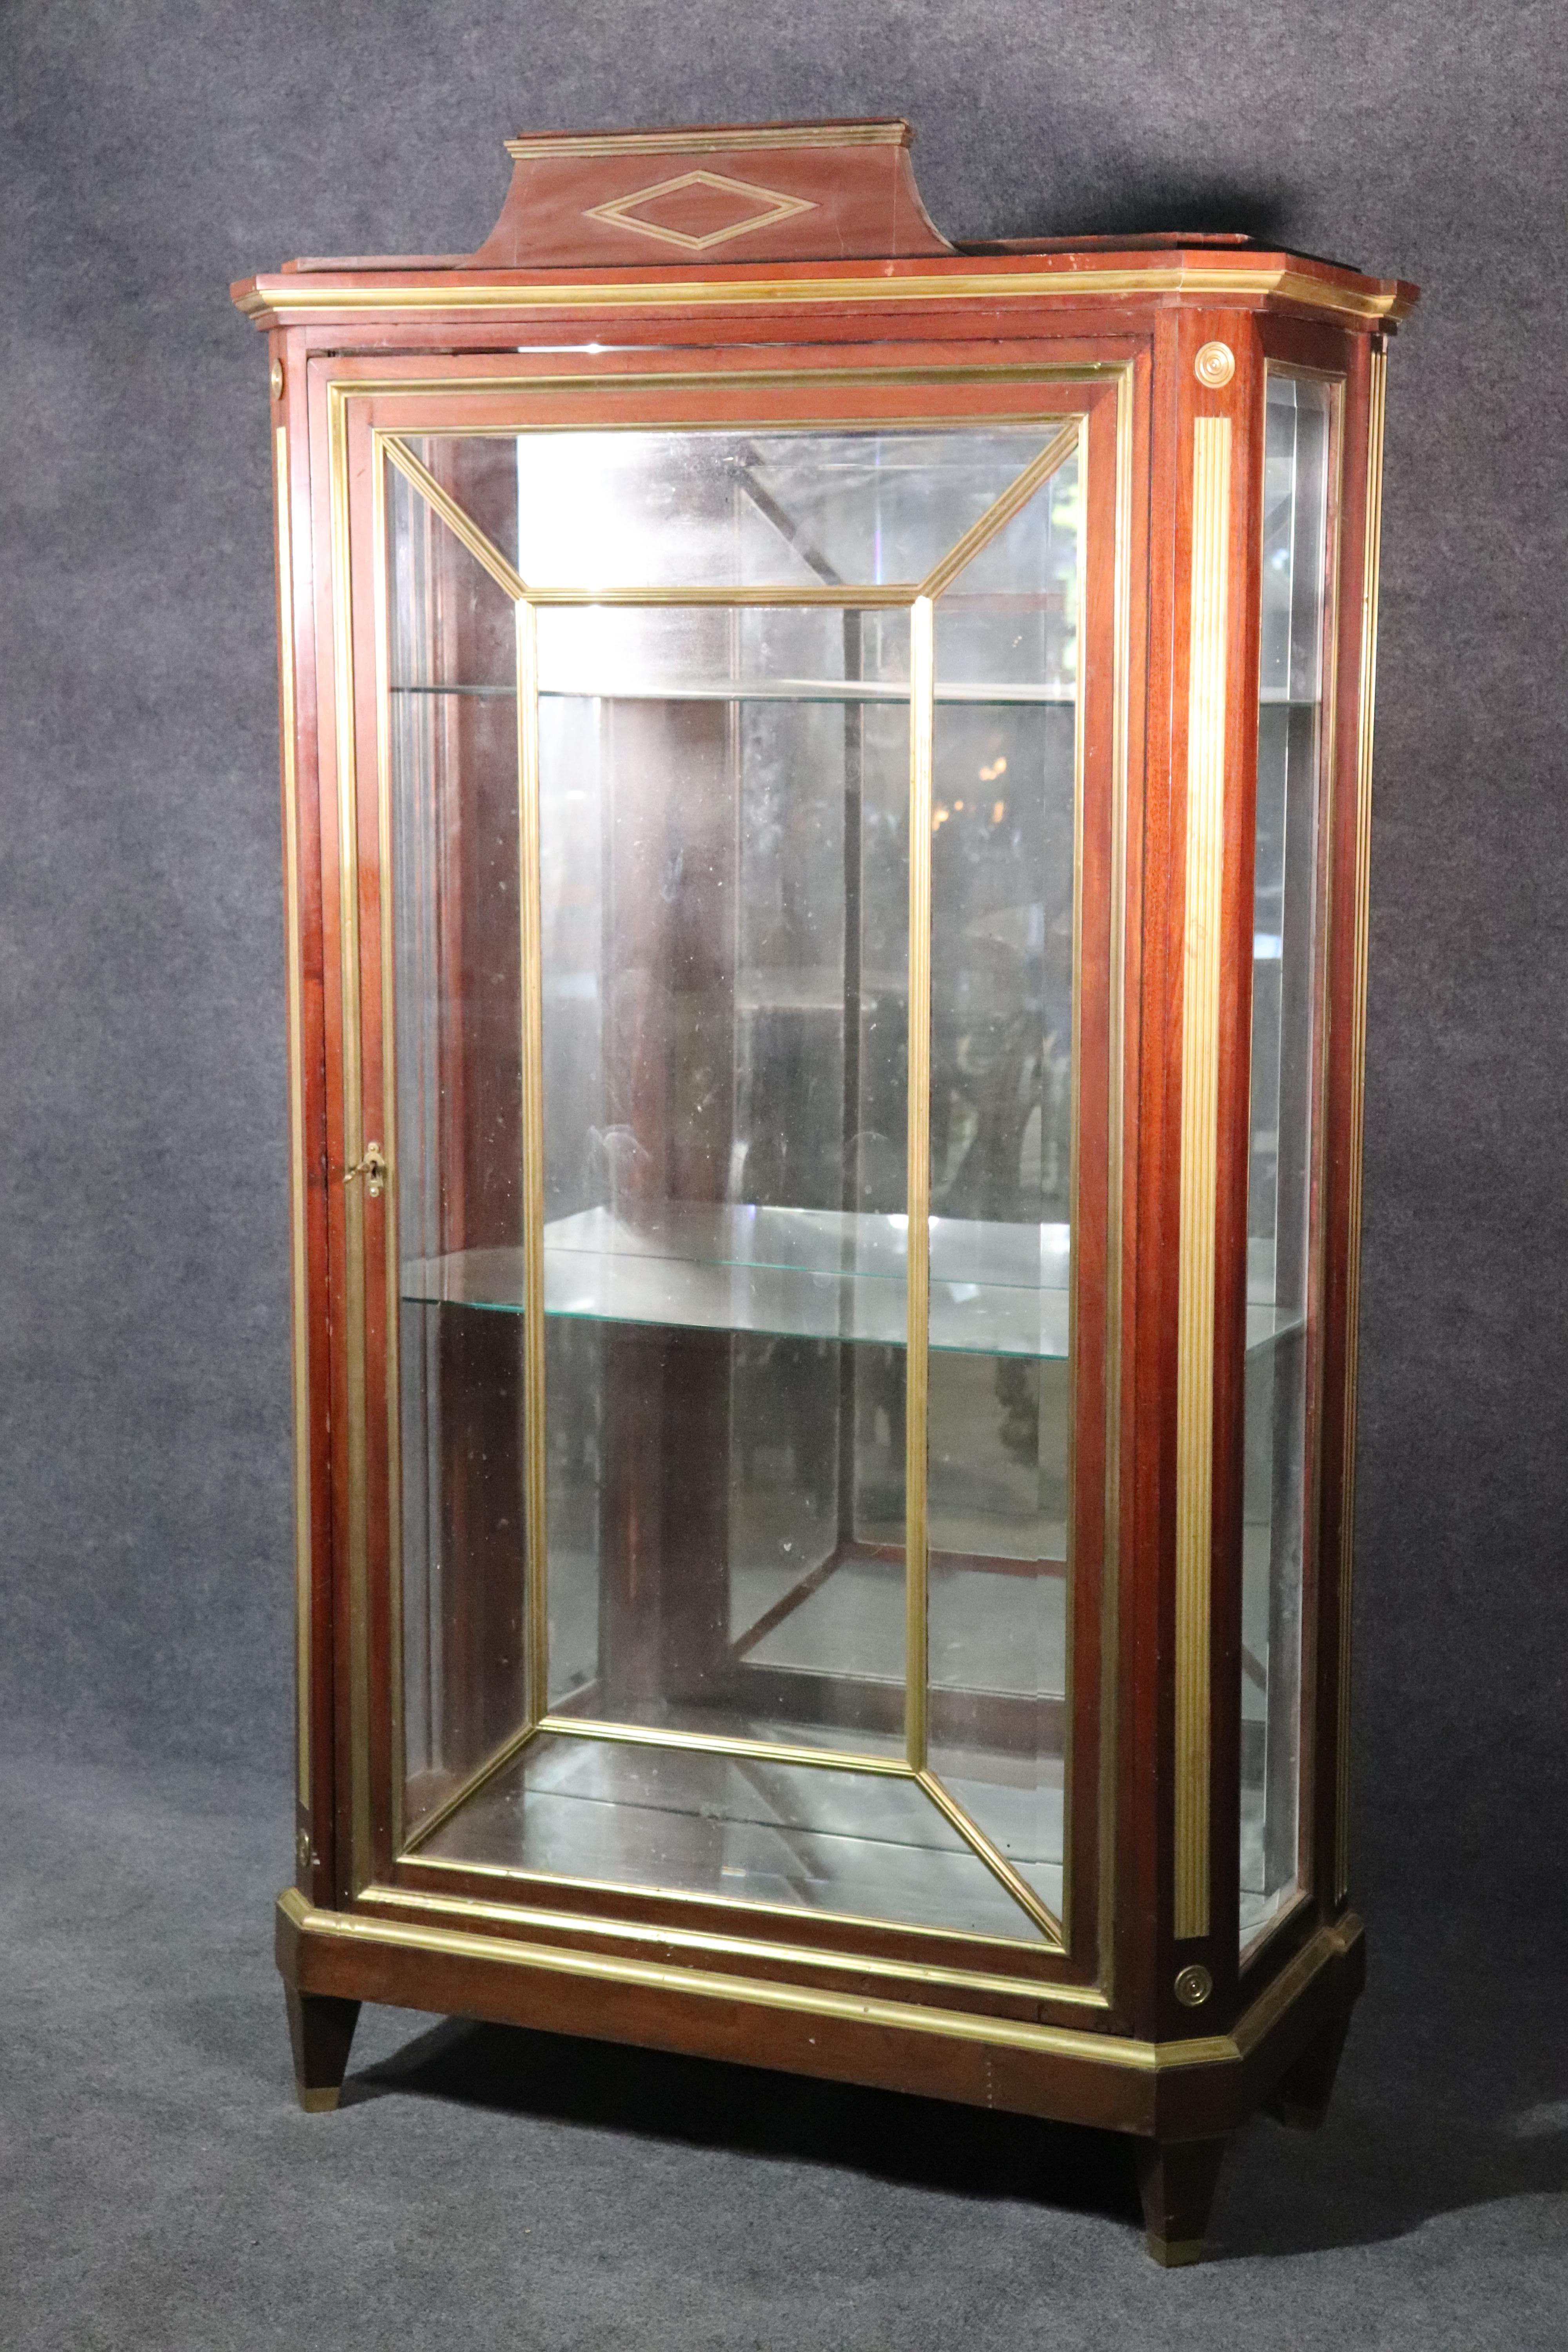 This is a very unique Russian vitrine with fantastic bronze ormolu and directoire styling. Look at the gorgeous design and solid mahogany contrasting beautifully with the brass and bronze trim. Dates to the 1850s era and is extremely